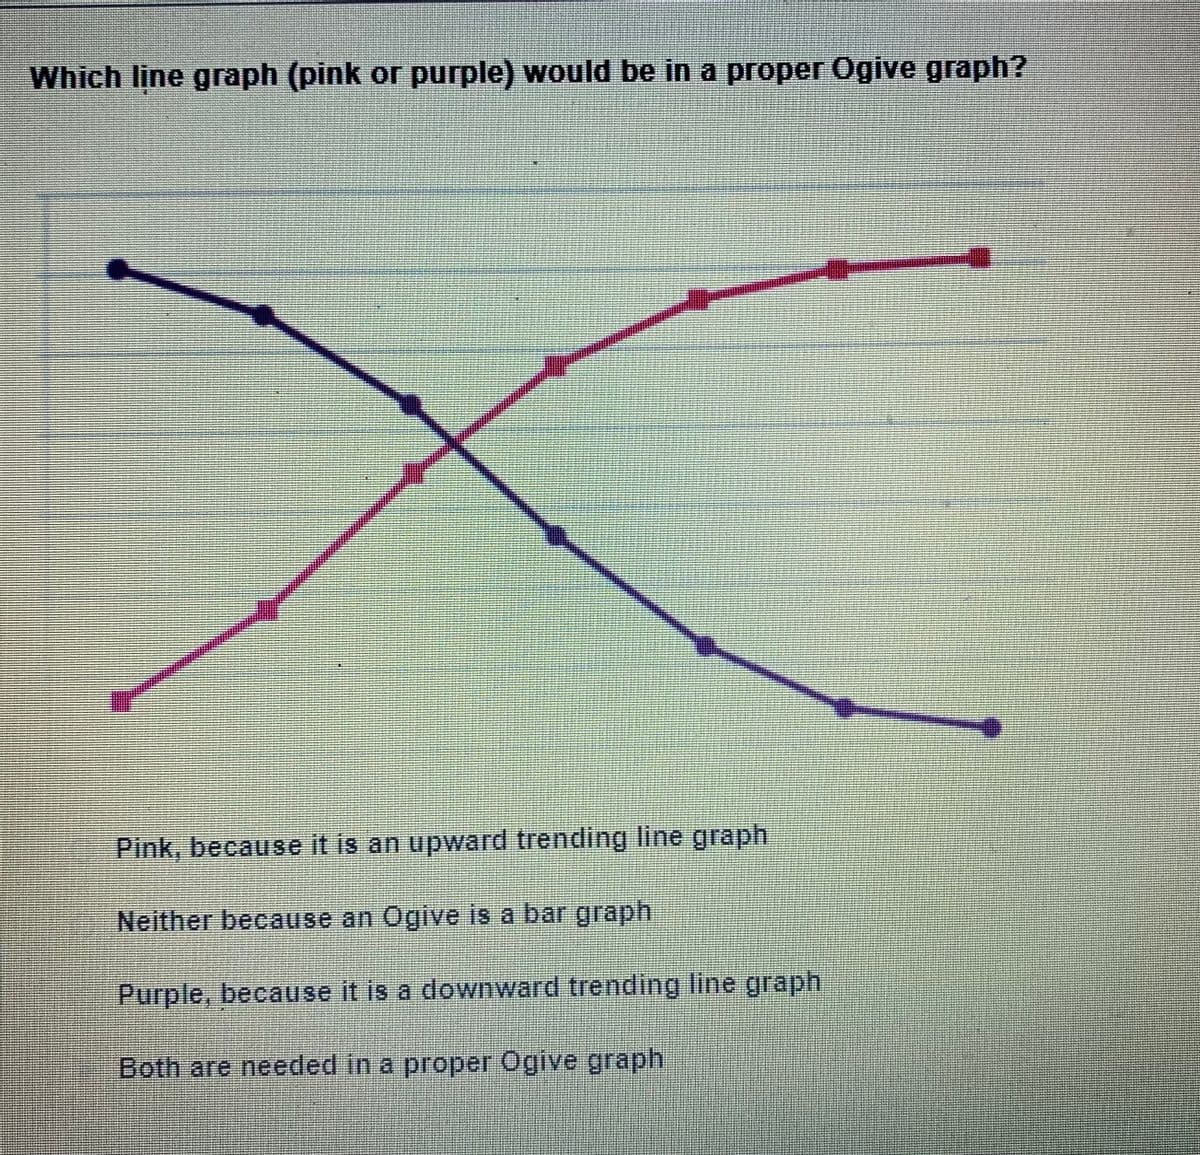 Which line graph (pink or purple) would be in a proper Ogive graph?
Pink, because it is an upward trending line graph
Neither because an Ogive is a bar graph
Purple, because it is a downward trending line graph
Both are needed in a proper Ogive graph